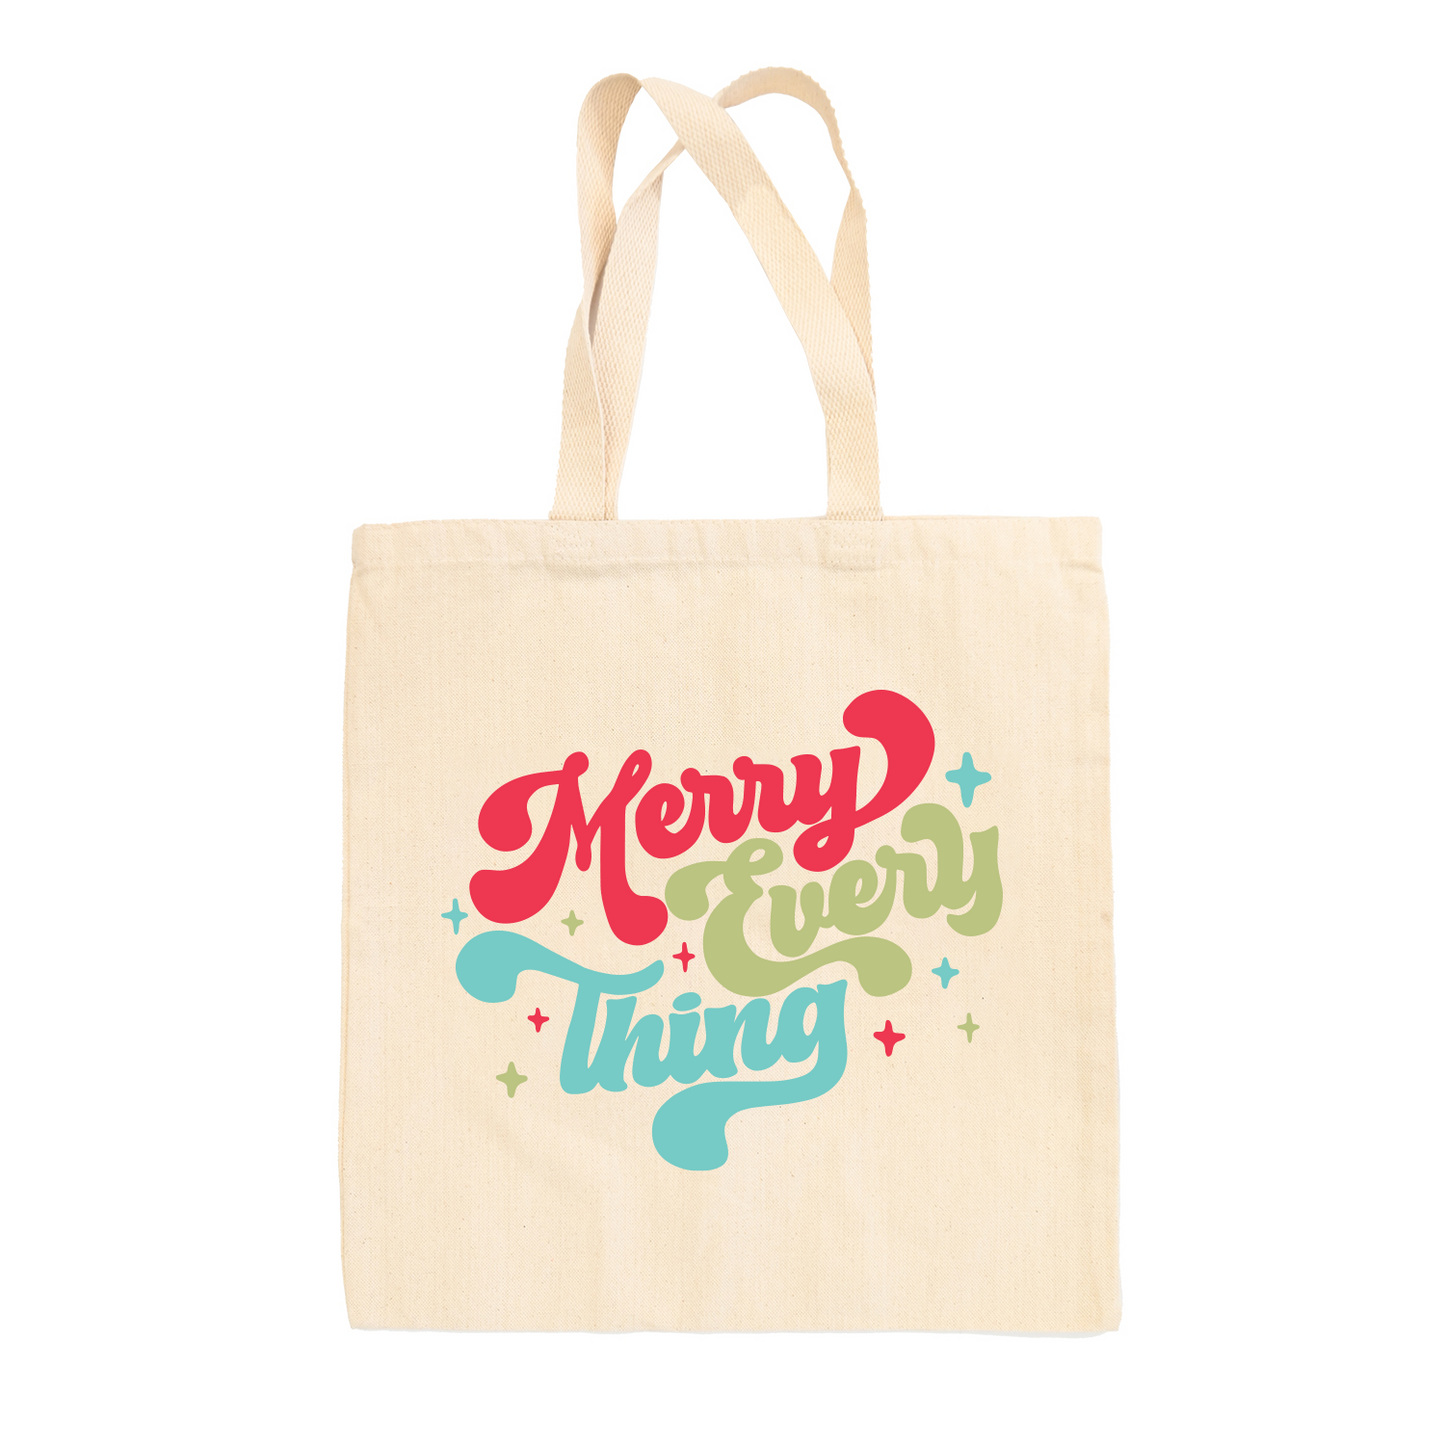 Merry Everything Tote Bag